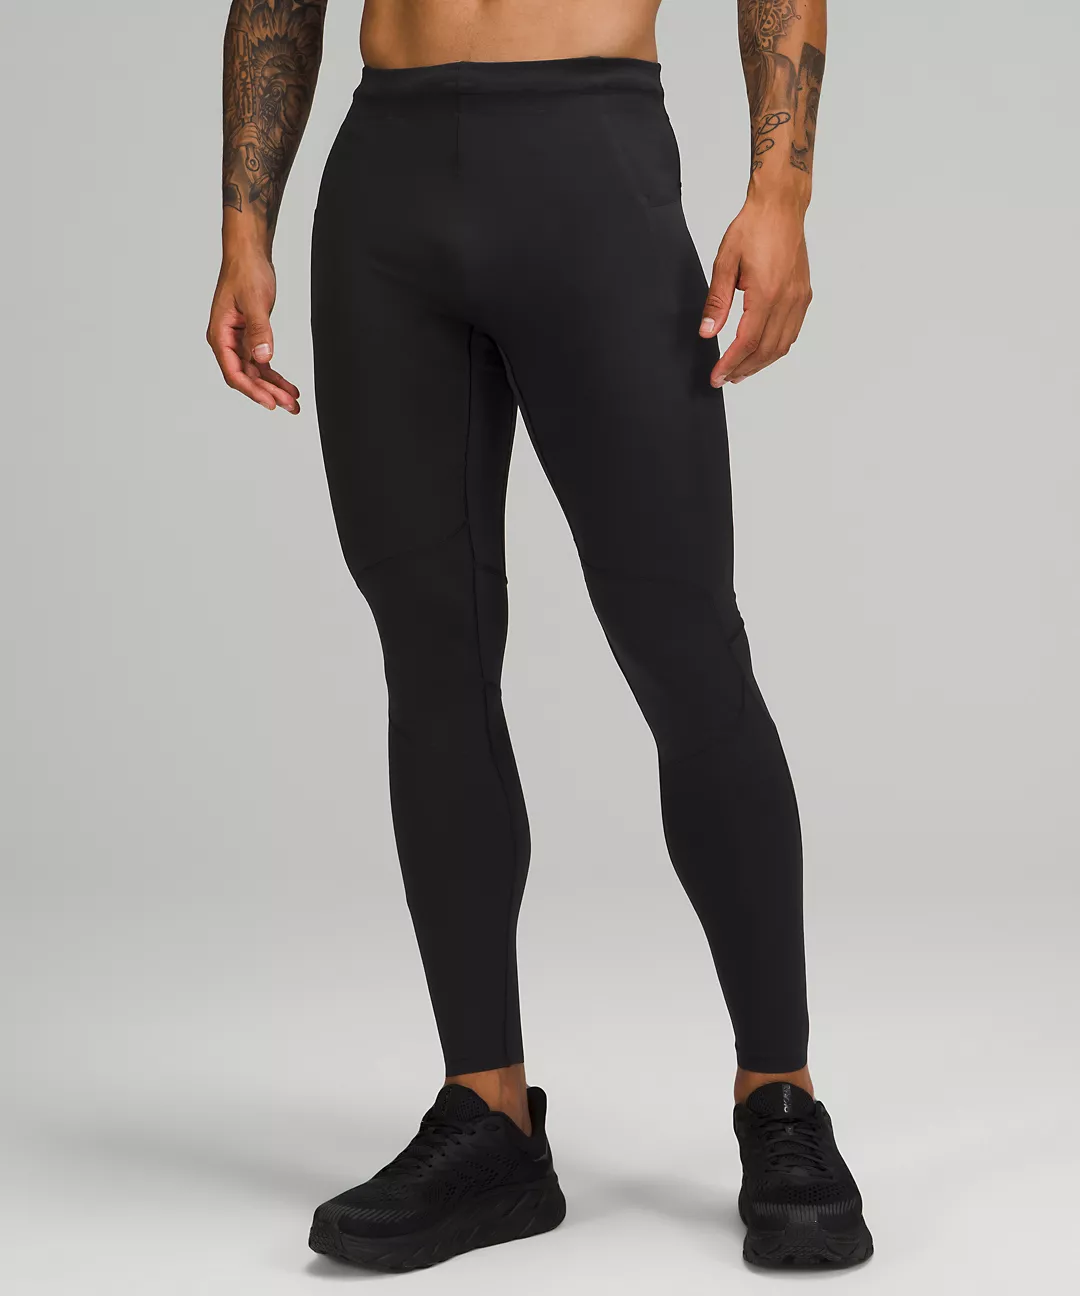 Nike Pro DRI FIT ADV Recovery Compression Tights Training Pants